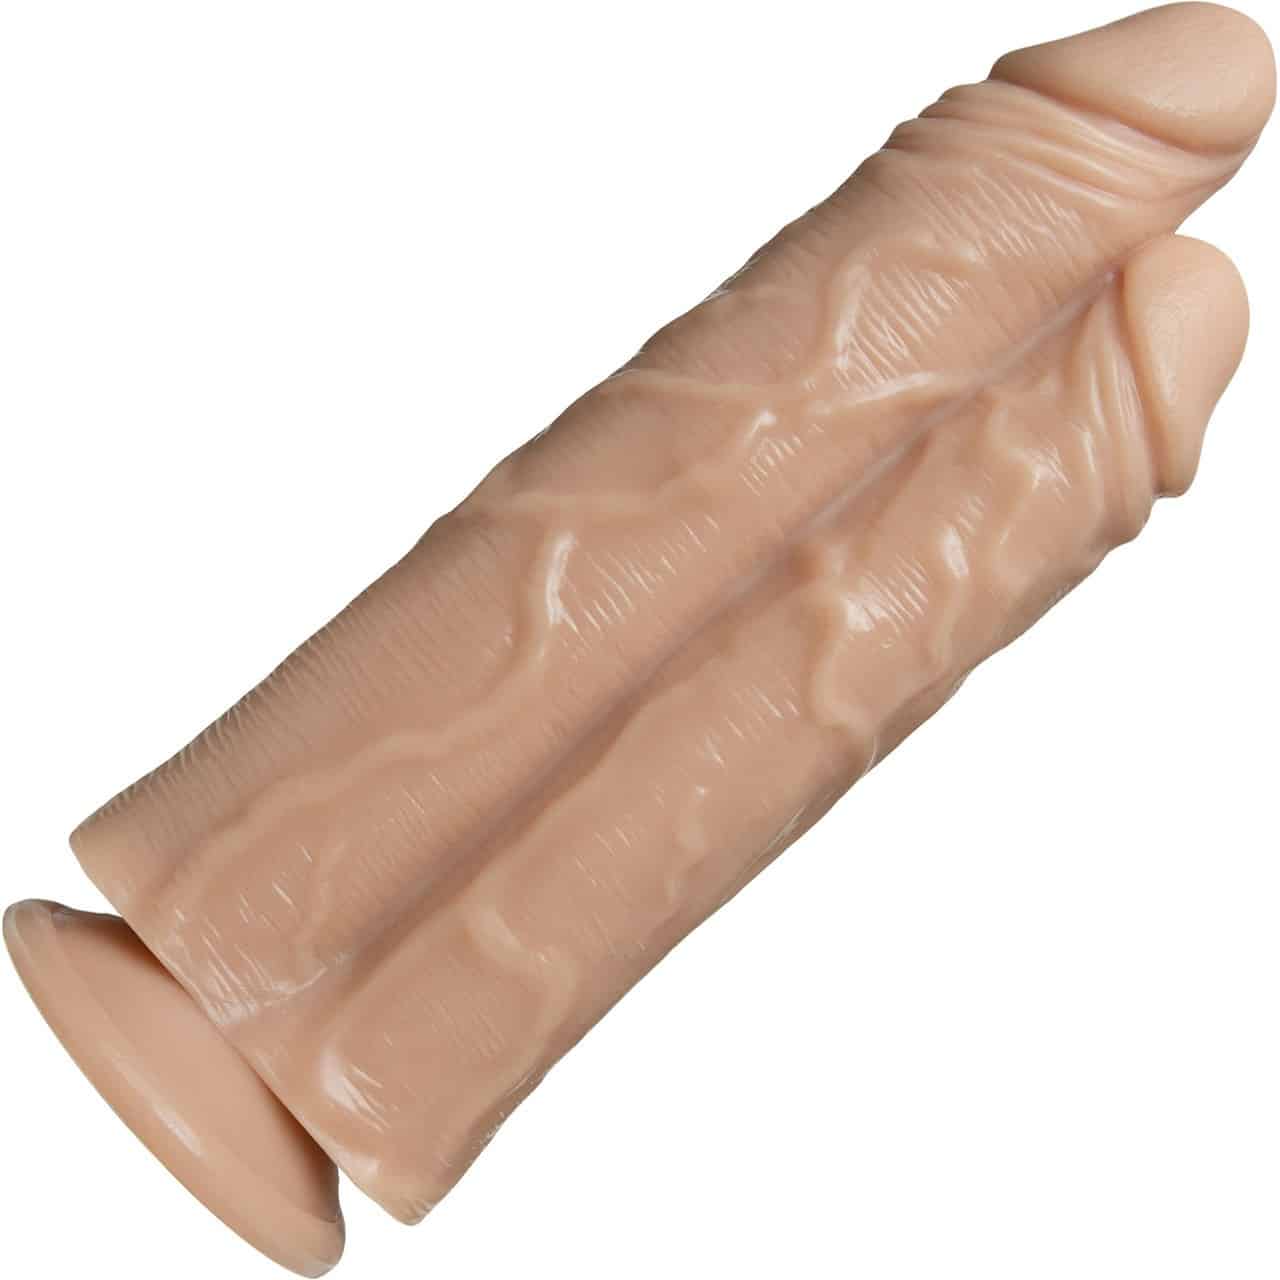 Dr Skin Double Trouble Shaft Dildo